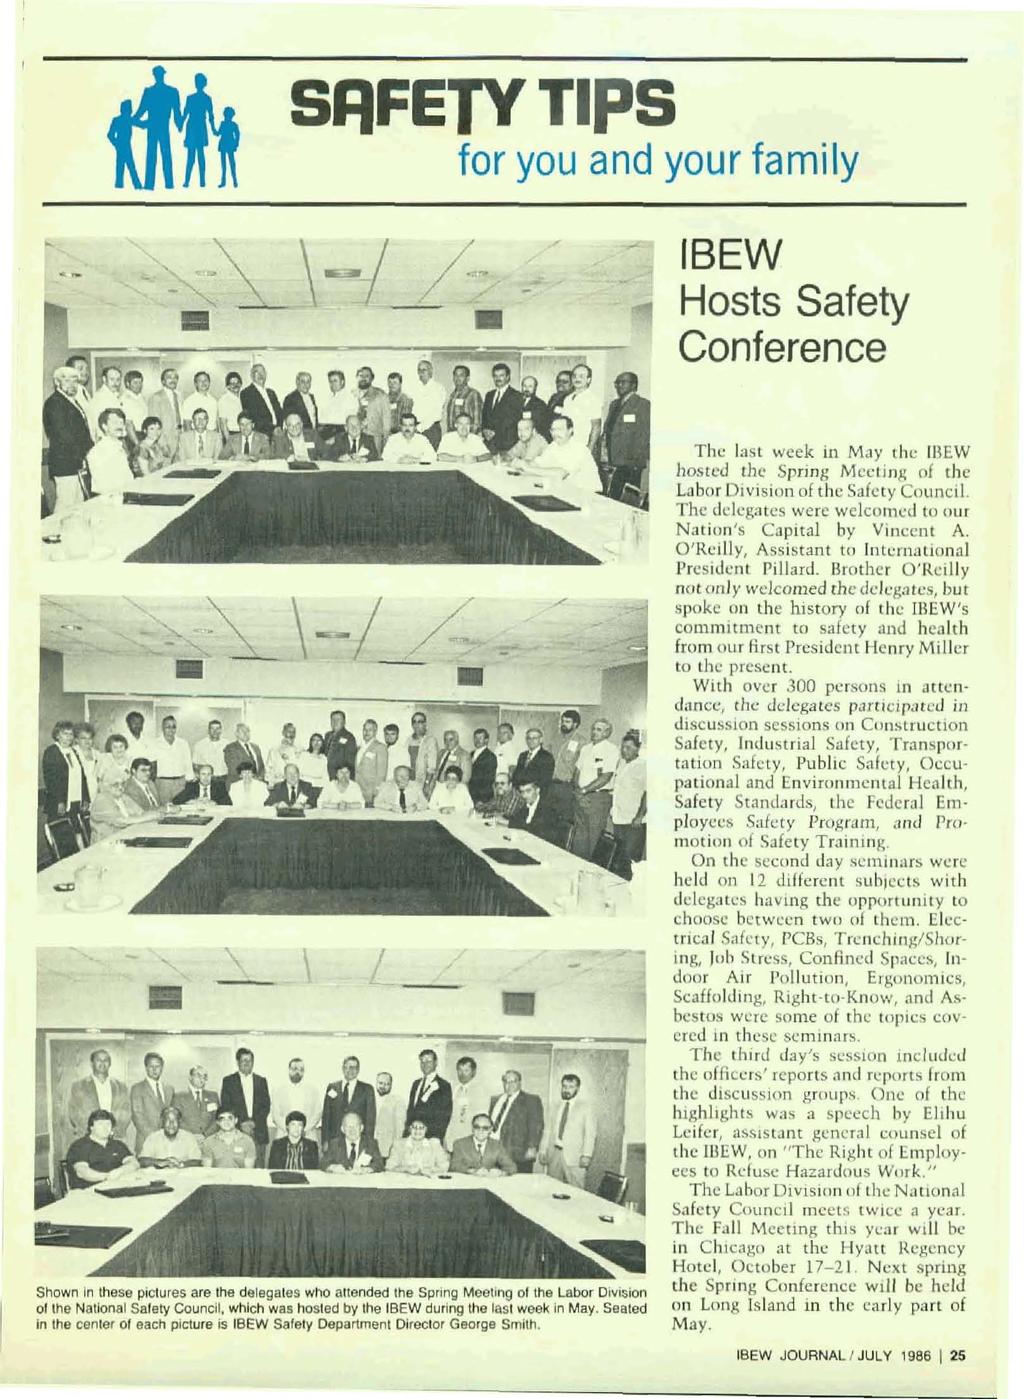 Sf!lFETY TIPS for you and your family '-, /J IBEW Hosts Safety Conference - -/~ Shown In these pictures are the delegates who altended the Spnng Meeting 01 the Labor DIvision althe National Safety